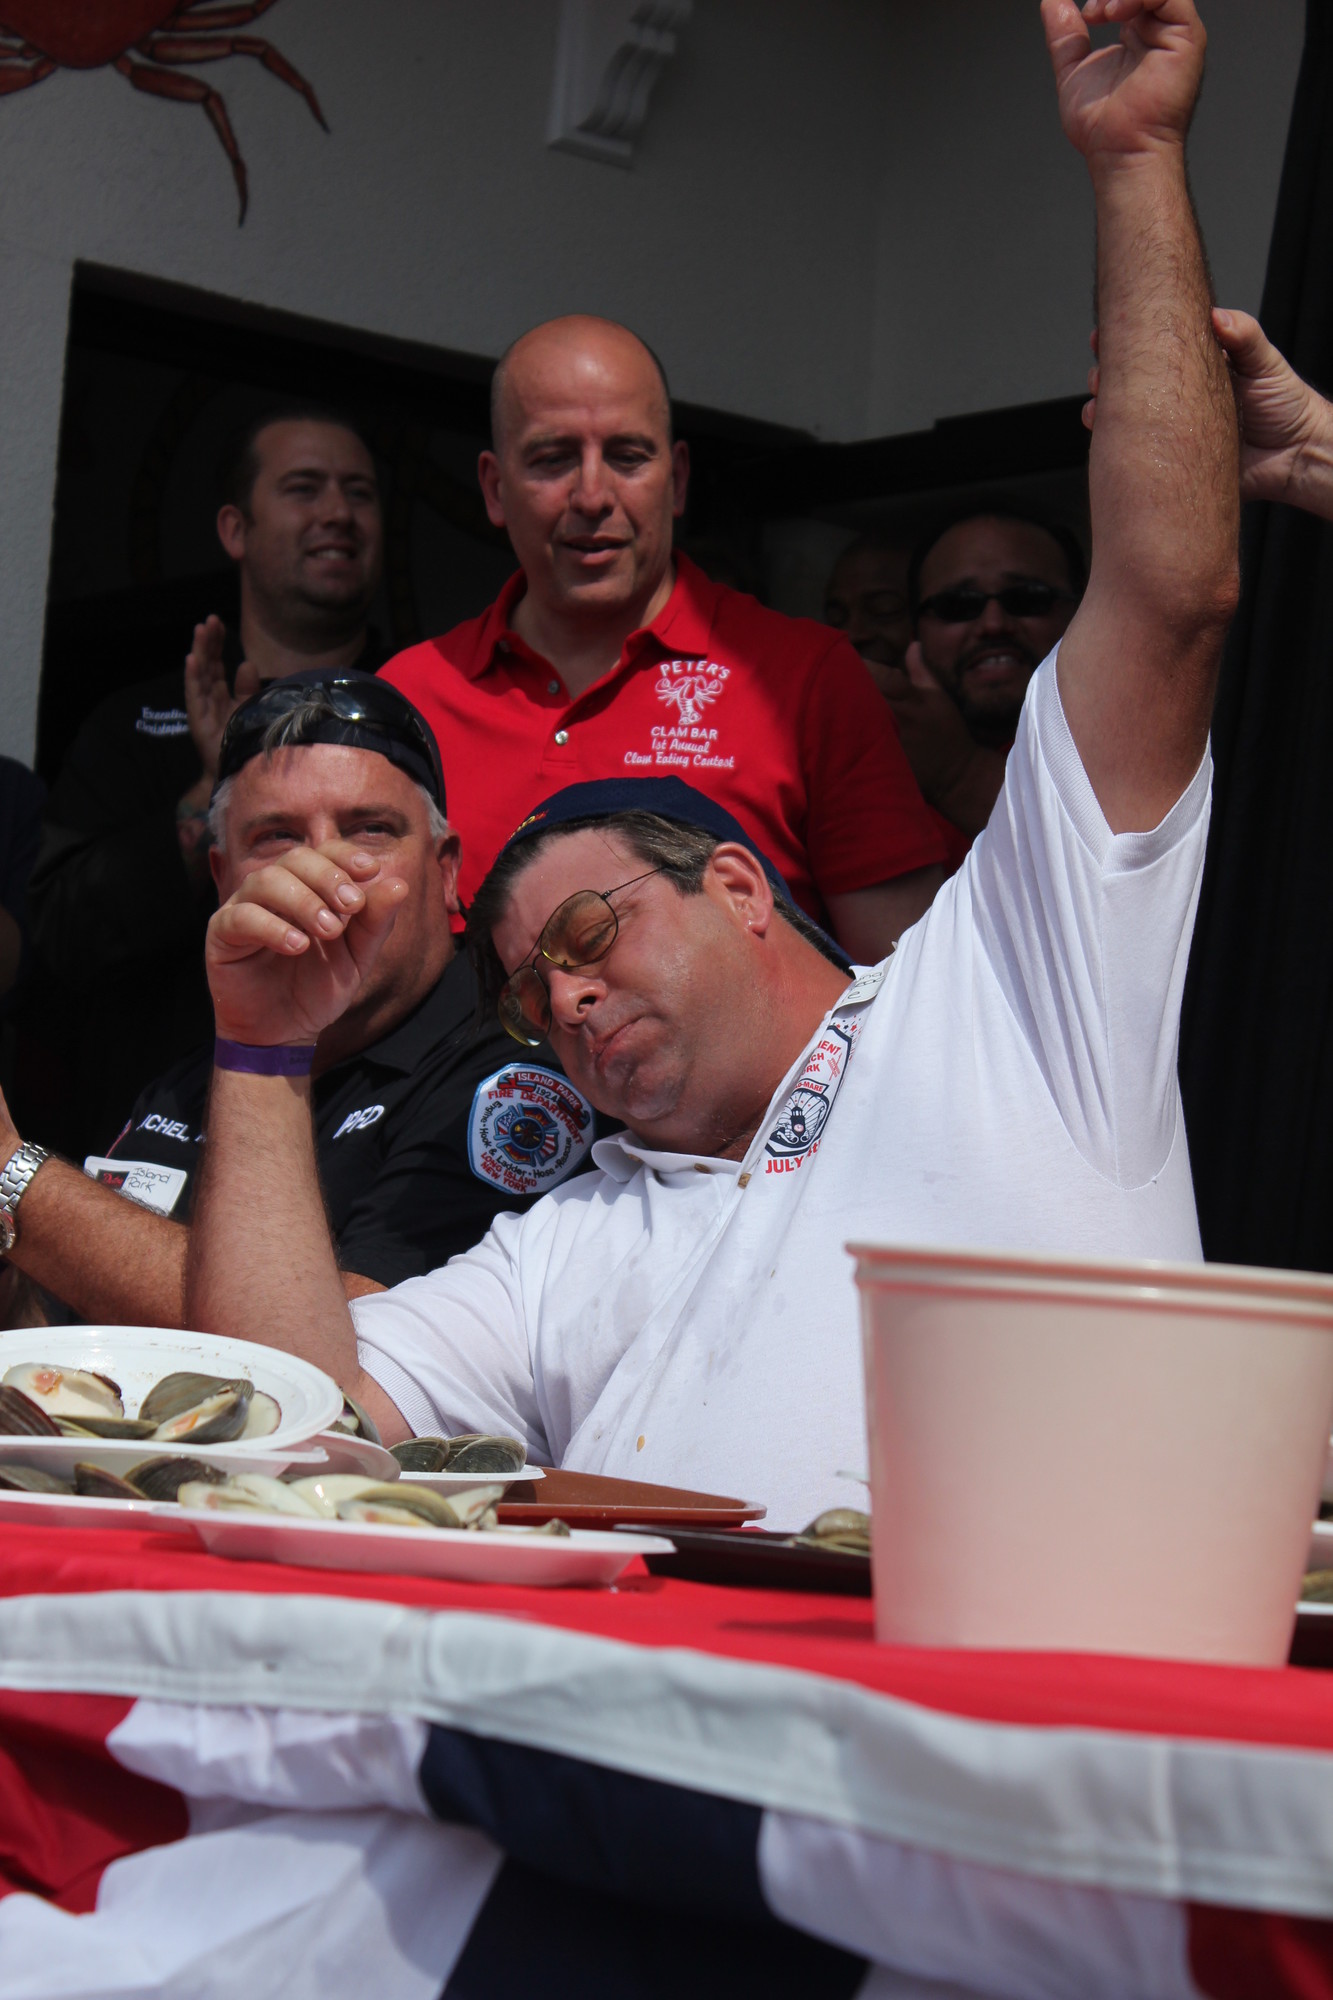 Long Beach firefighter Richie Santoro raised his hand in victory after eating eight dozen clams and earning a $2500 prize for his station in the Peter’s Clam Bar eating contest.